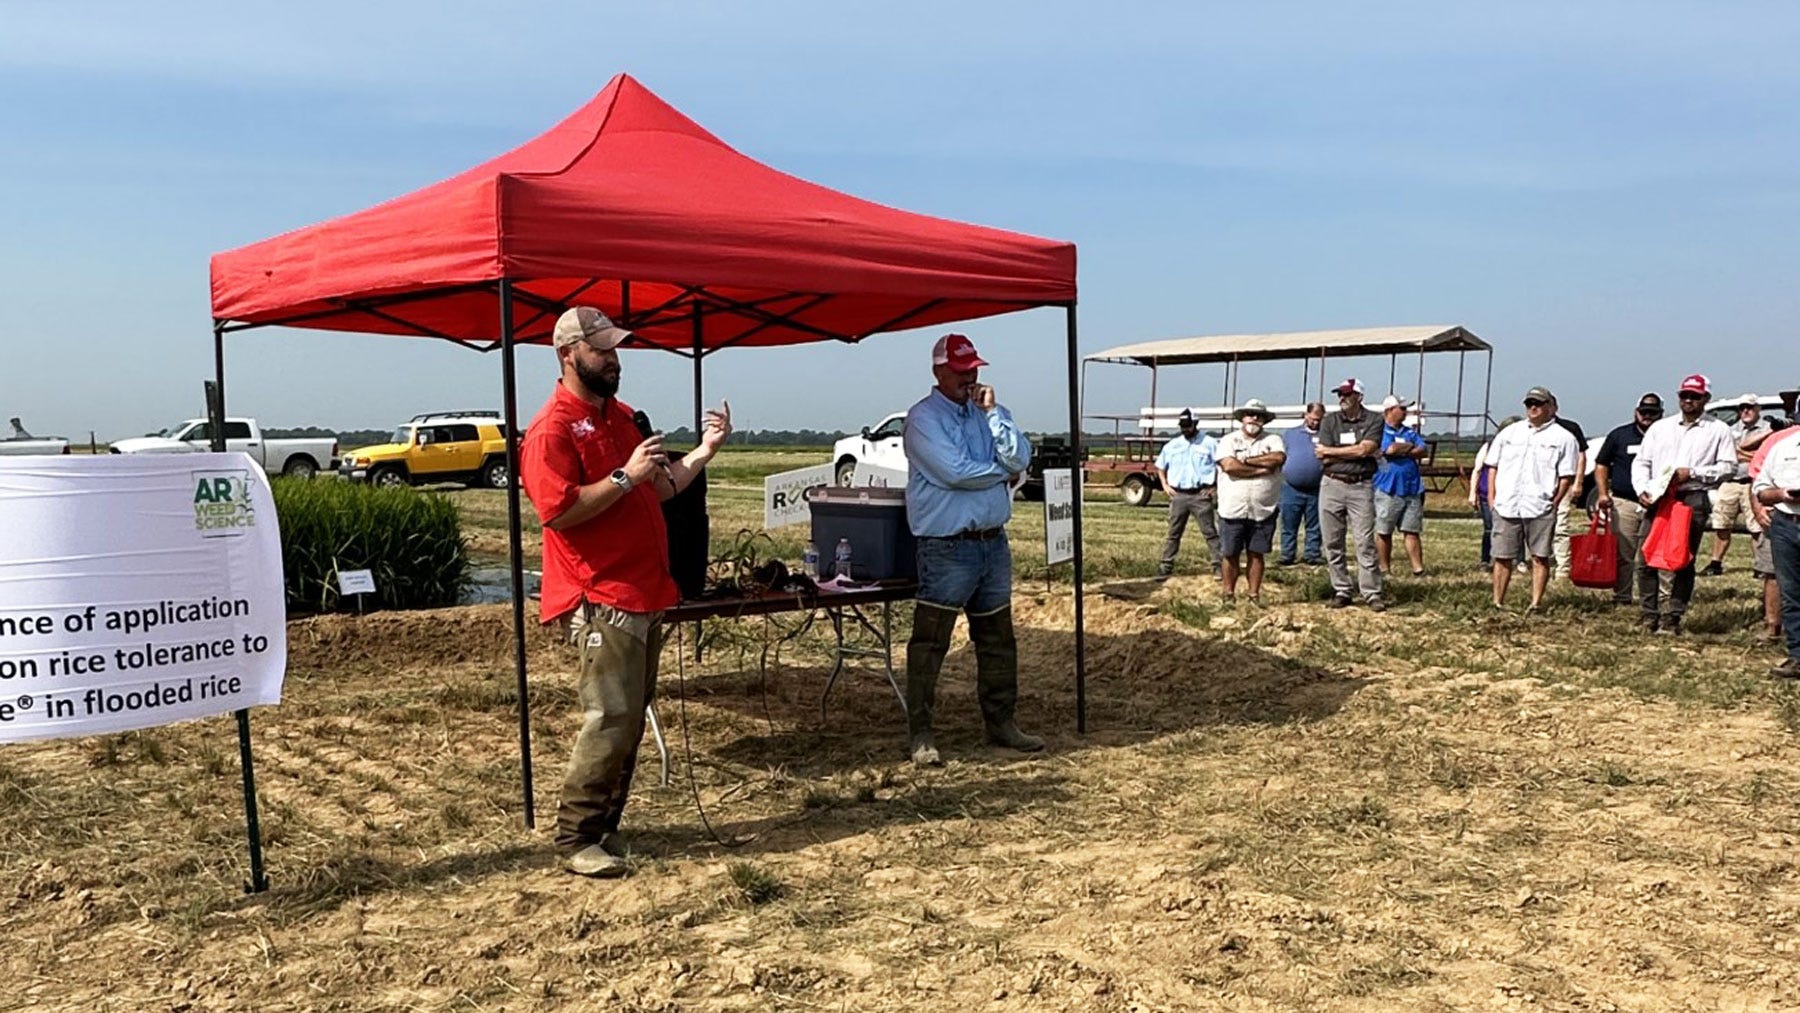 Two men presenting at field day under red tent to a group of attendees. Photo by Whitney Haigwood